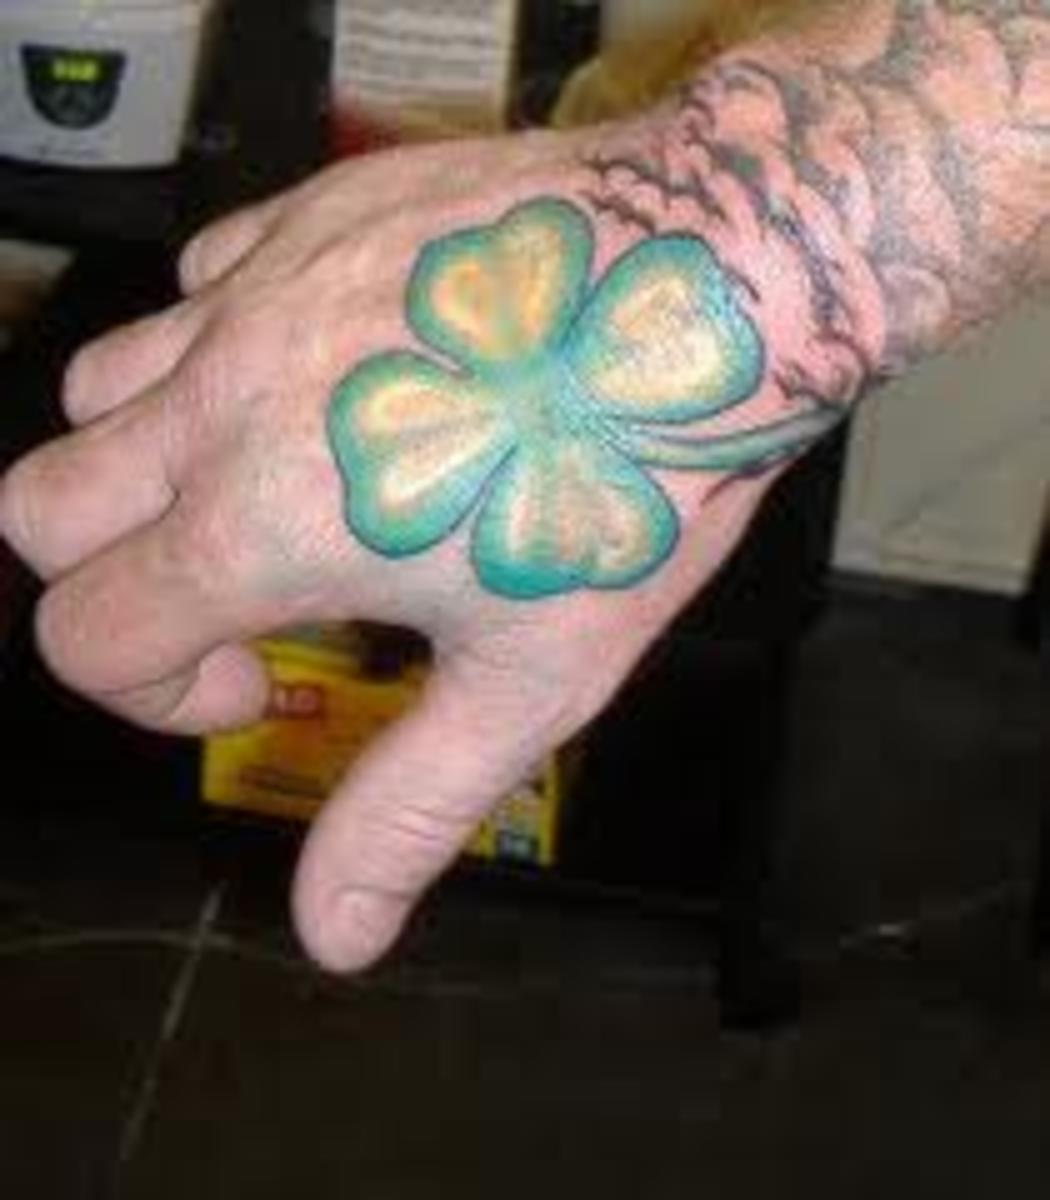 four-leaf-clover-tattoo-designs-and-meanings-four-leaf-clover-tattoo-ideas